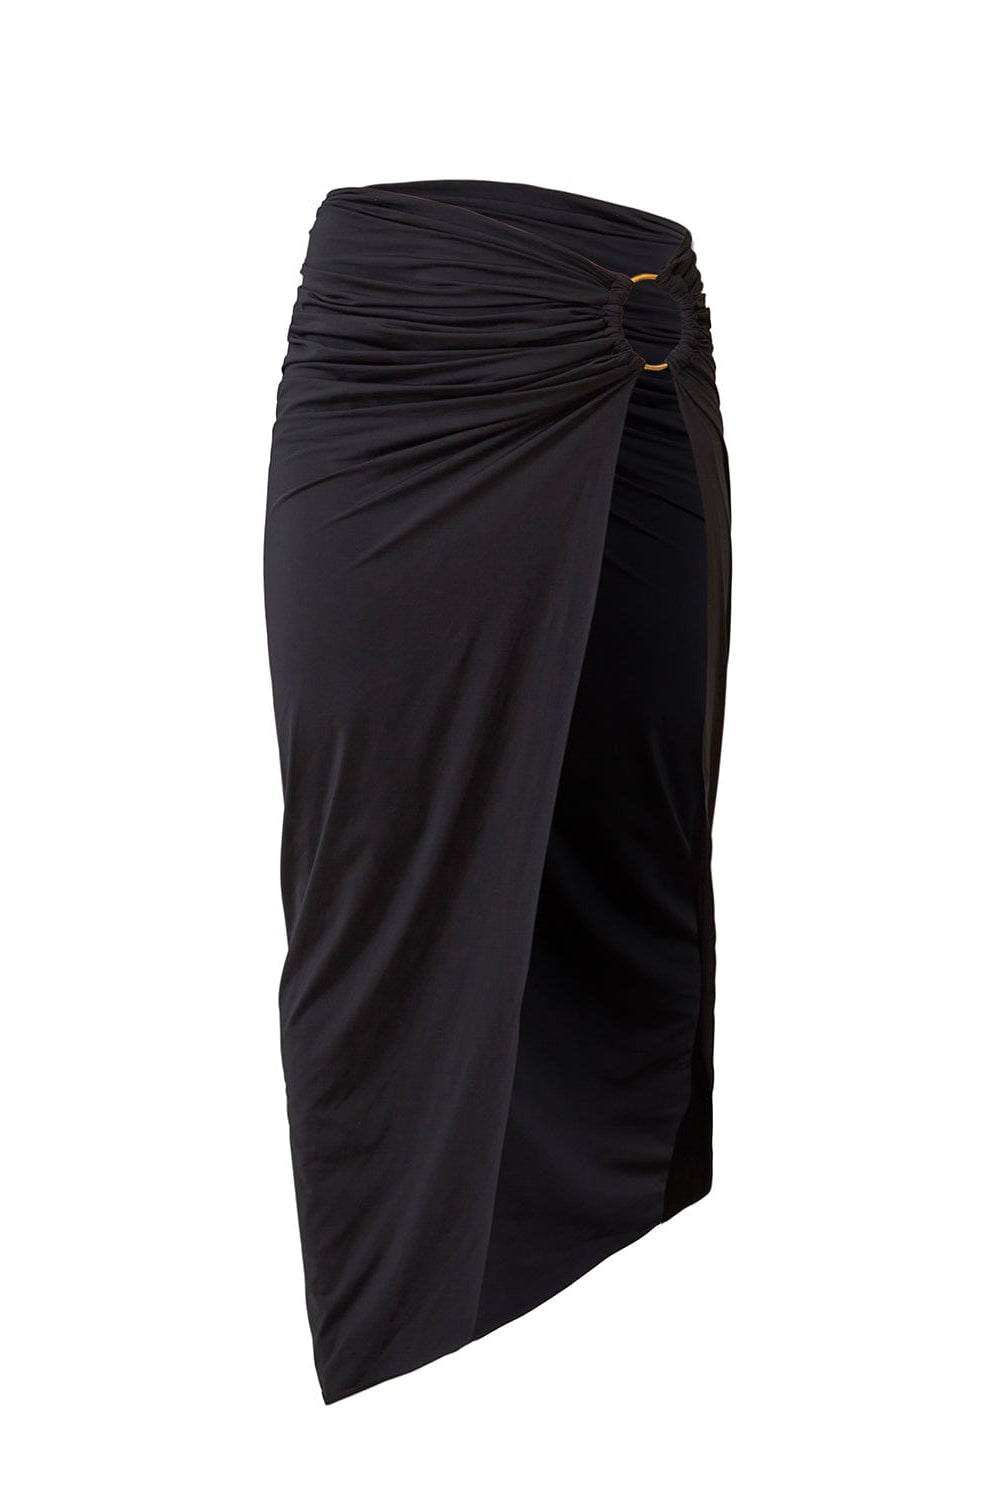 A black skirt coverup with ring detail. Featured against a white wall background.